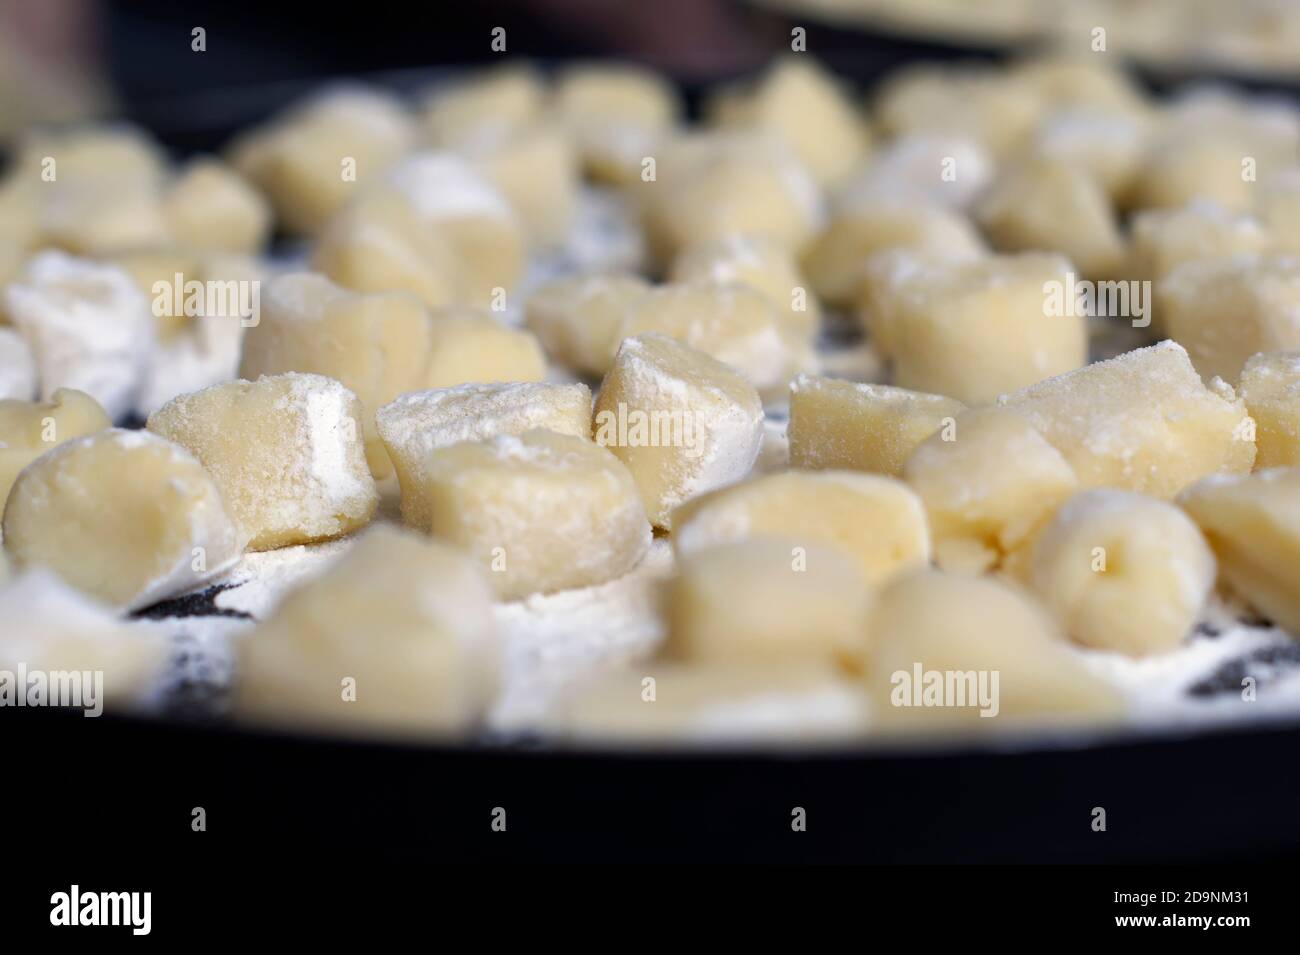 Many homemade gnocchi on a tray with the background blurred. Stock Photo